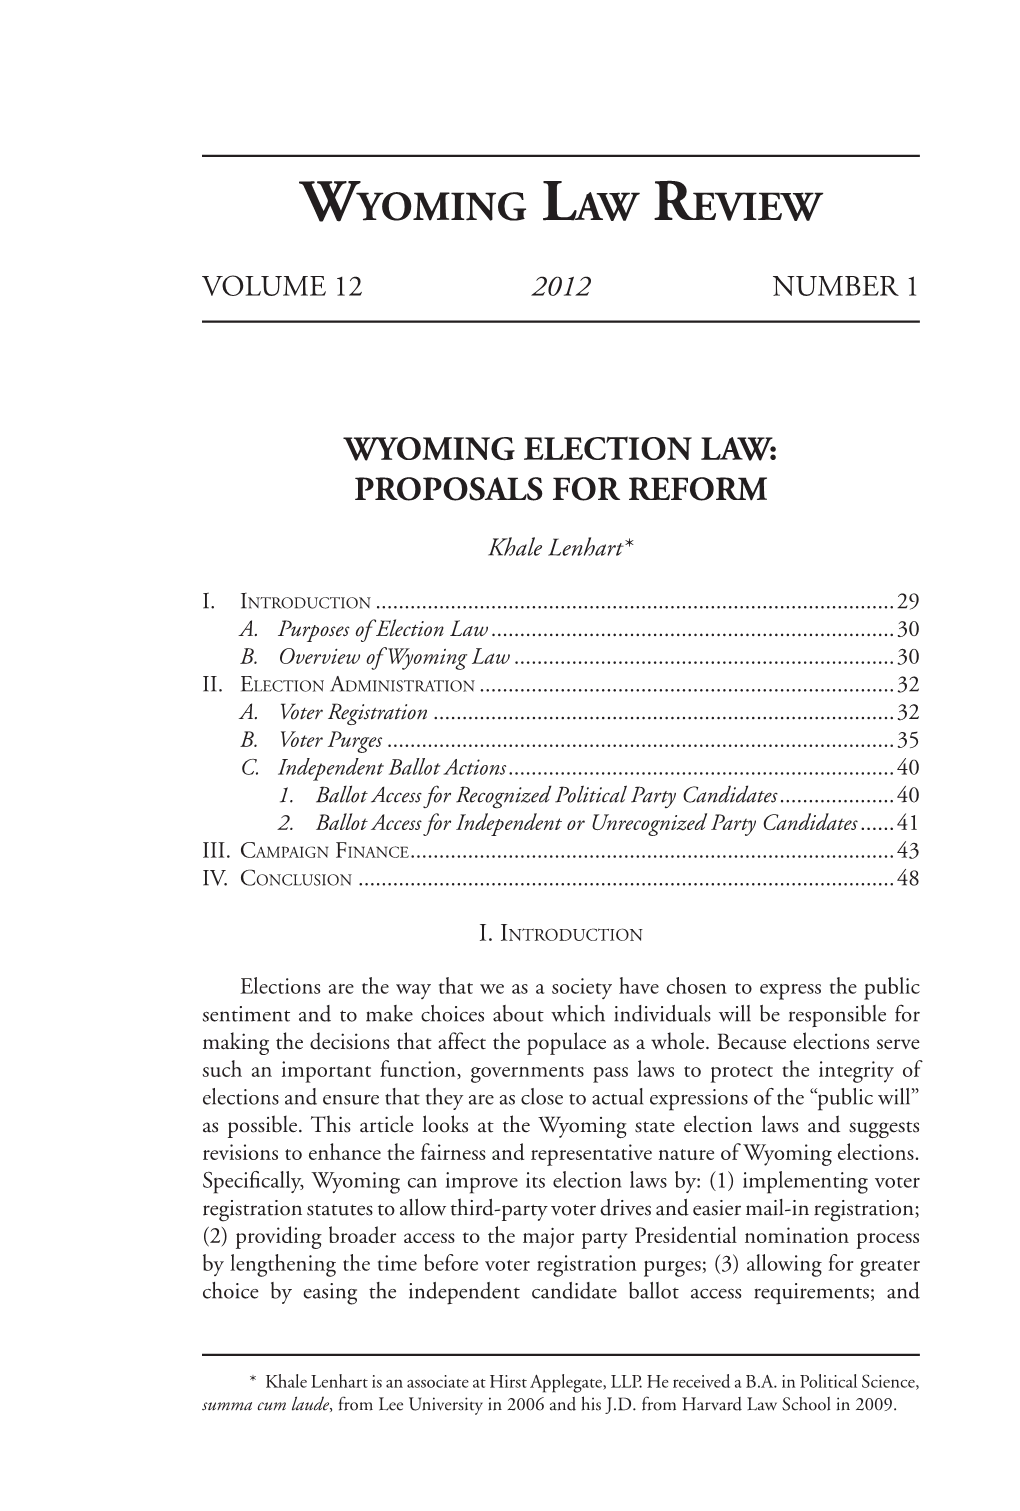 Wyoming Election Law: Proposals for Reform